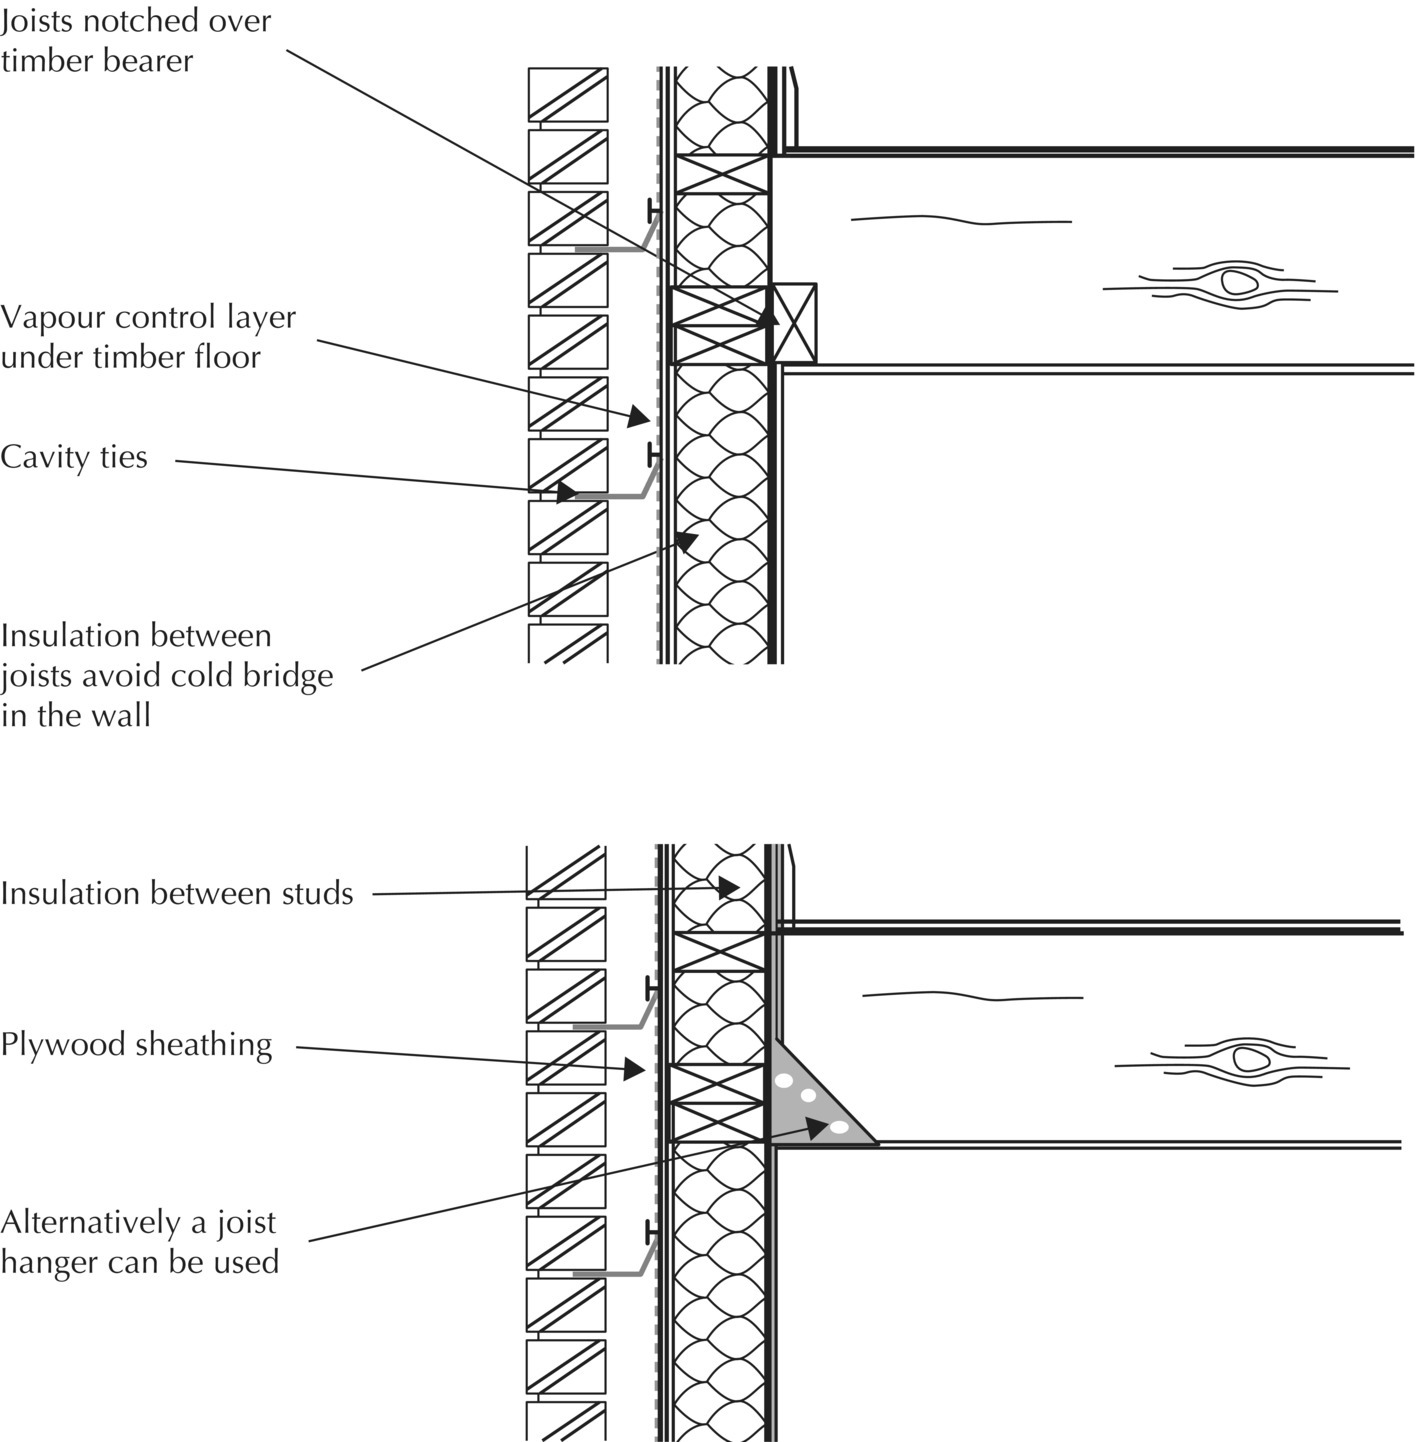 2 Diagram of timber framed wall. Left: Arrows are marking the joists notched over timber bearer, vapour control layer under timber floor, etc. Right: Arrows indicate the insulation between studs, plywood sheathing, etc.